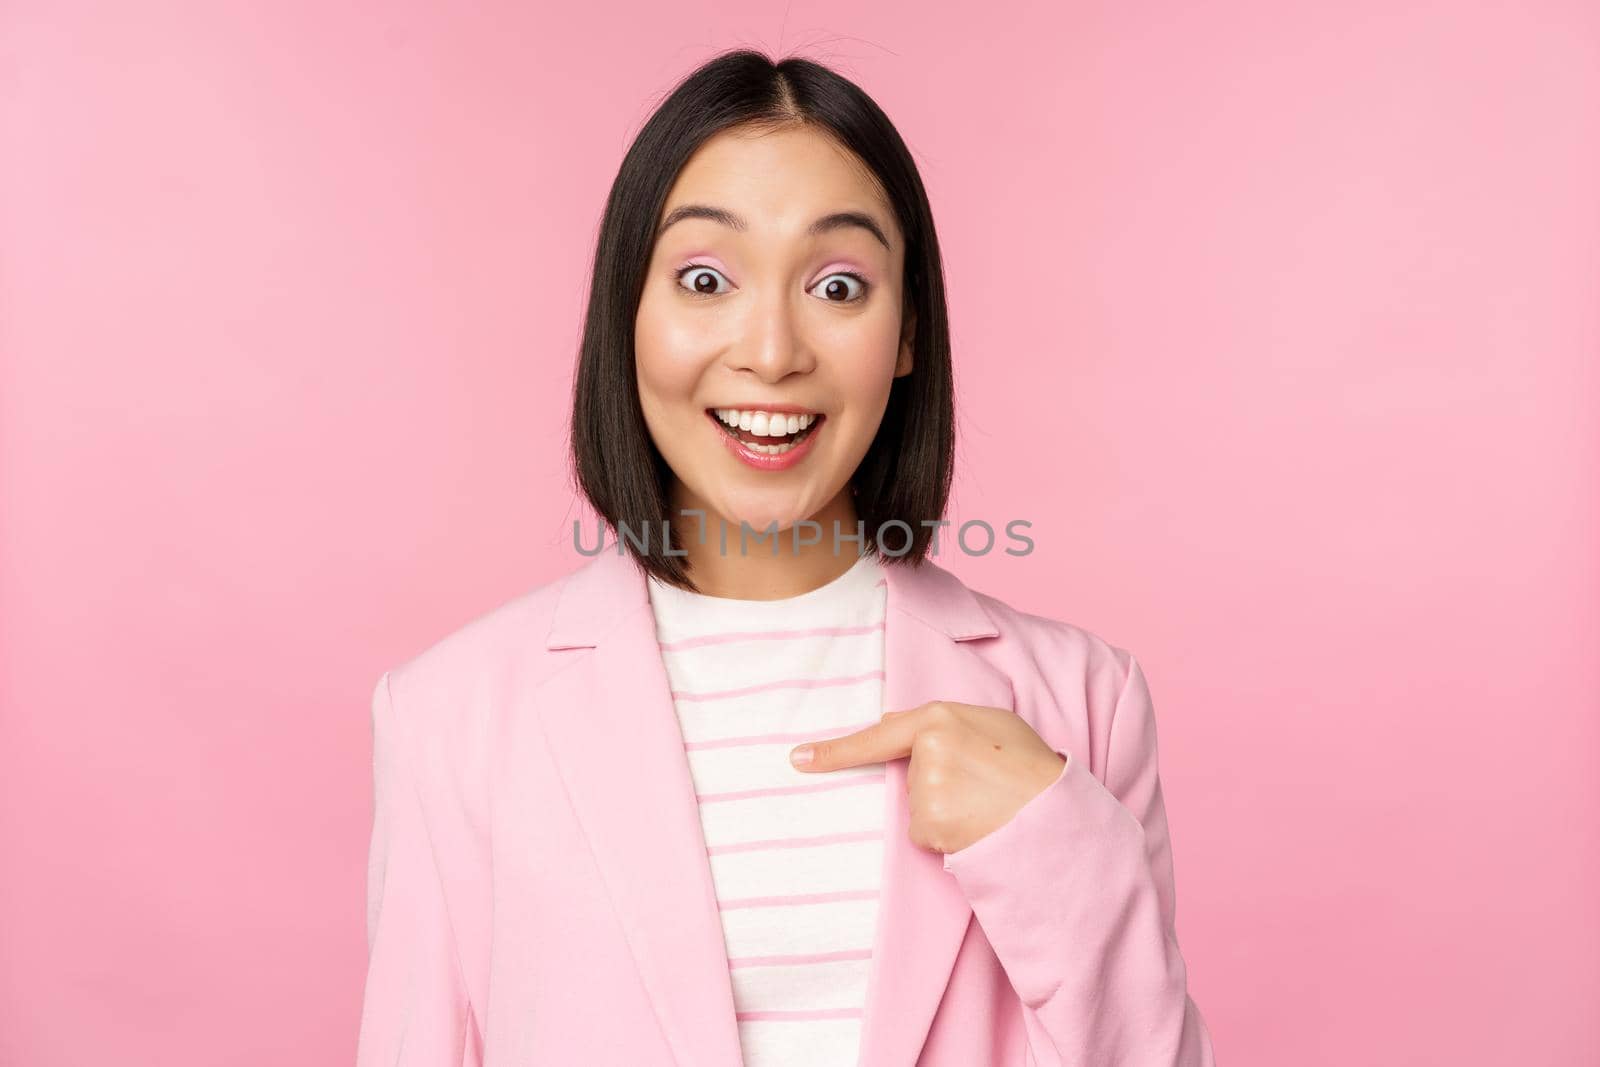 Portrait of young asian businesswoman with surprised, excited face expression, pointing finger at herself, standing in suit over pink background.